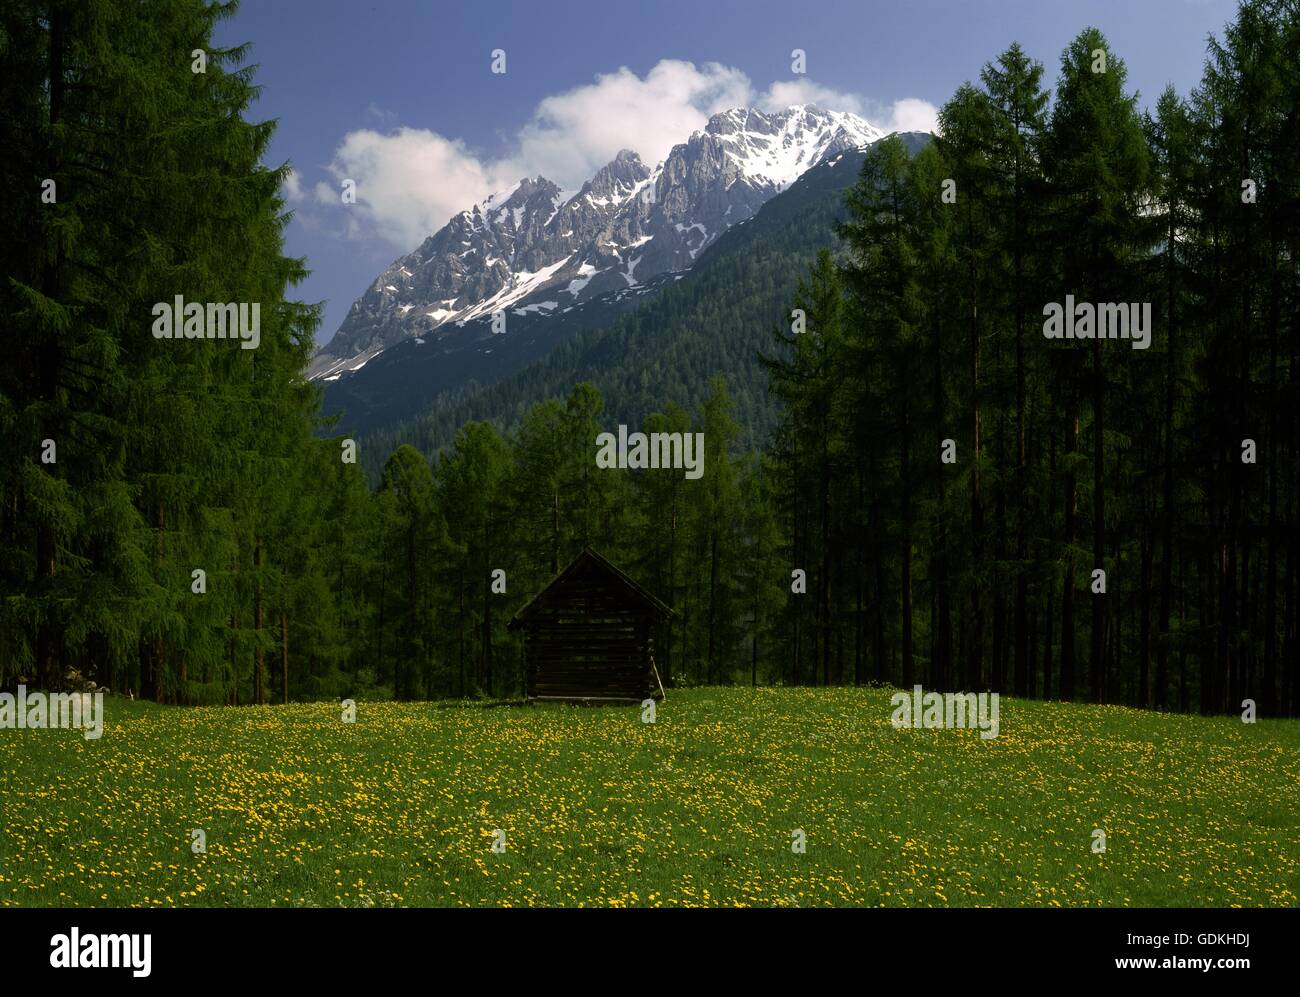 geography / travel, Austria, Tyrol, landscapes, at Holzleitensattel with Marienberg (peak), Mieminger Chain near Obsteig, Stock Photo